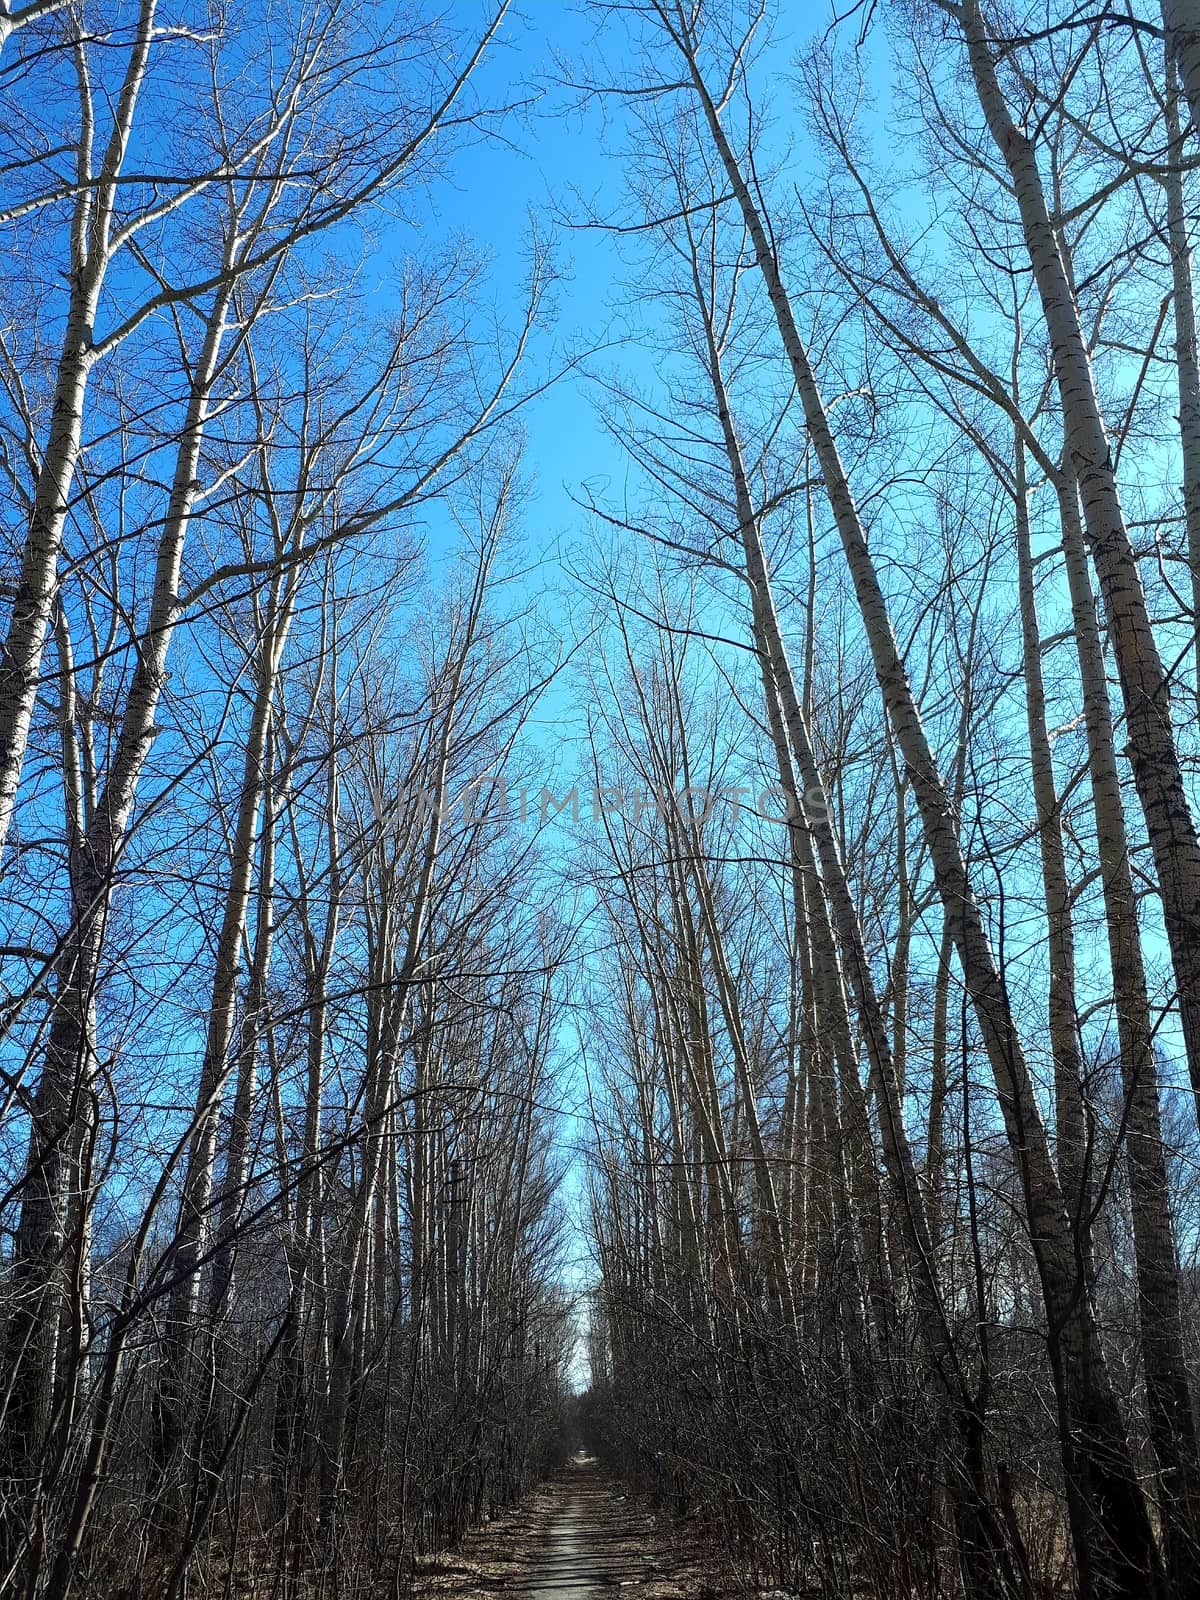 Alley in the spring forest overlooking the blue sky.